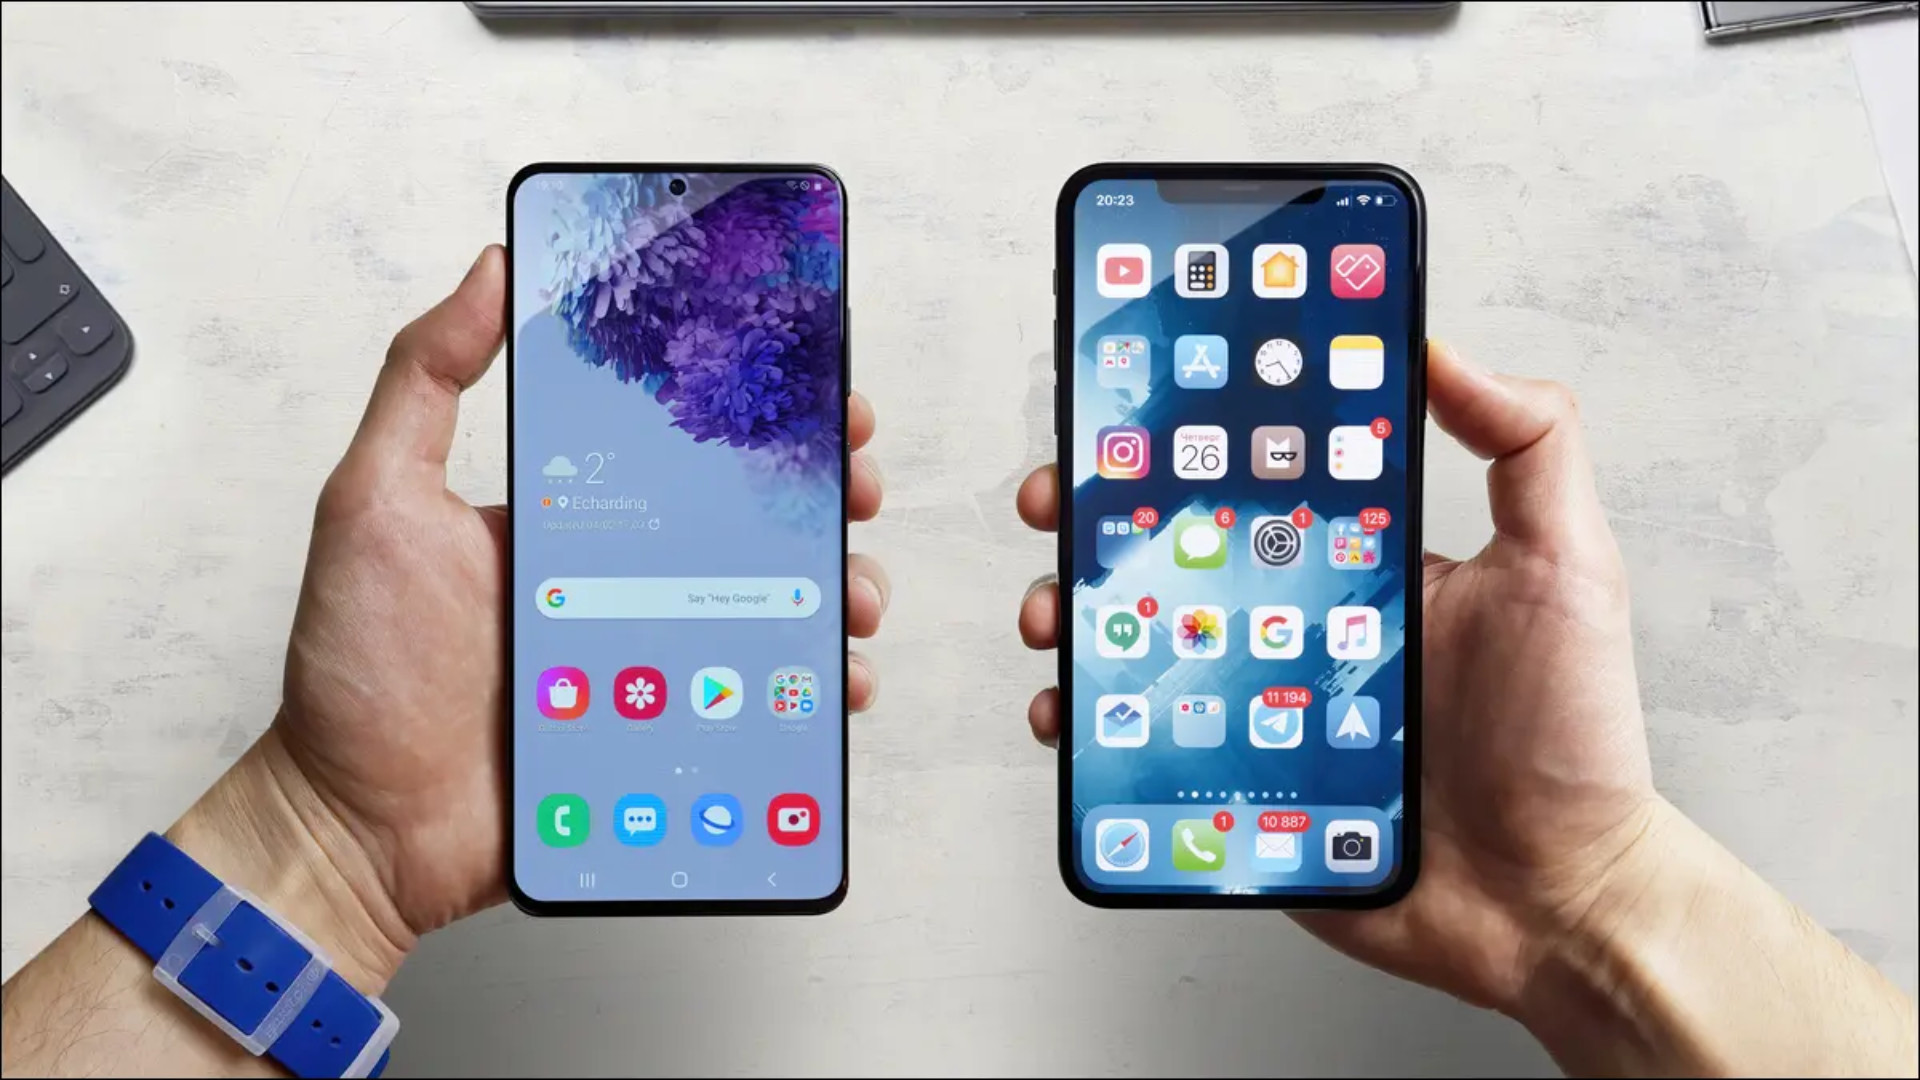 Android vs iPhone - Which One is Better?